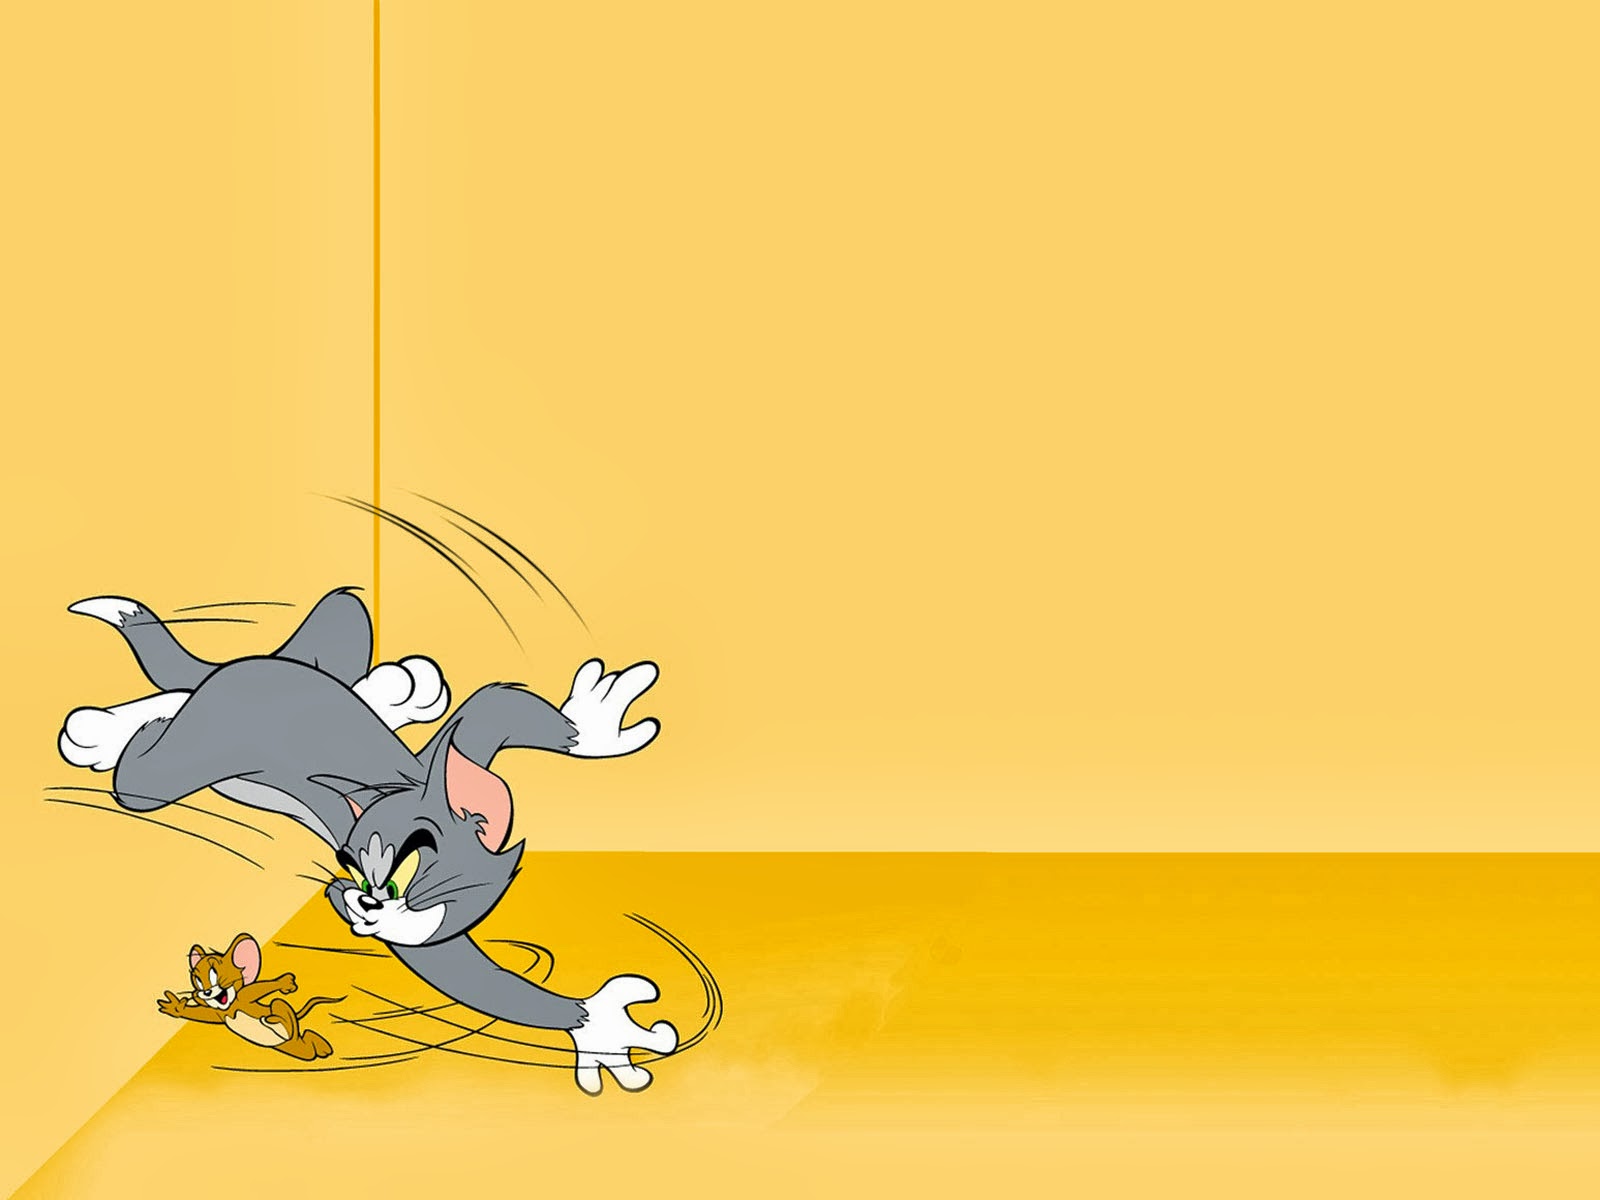 Tom and Jerry Cartoon PPT Backgrounds   PPT Backgrounds Templates